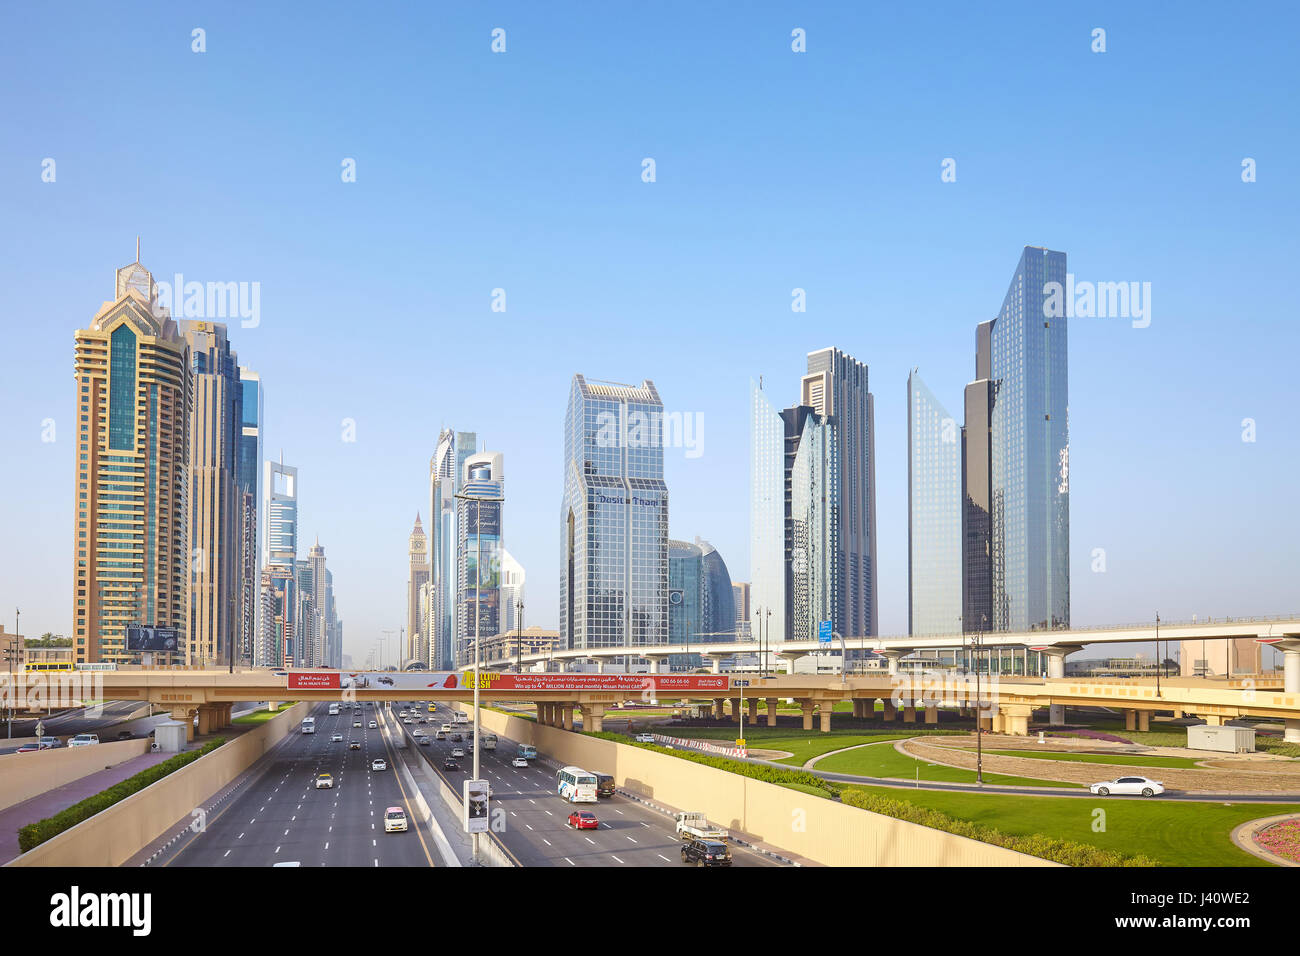 Dubai, United Arab Emirates - May 03, 2017: City downtown with skyscrapers and extensive road infrastructure. Stock Photo